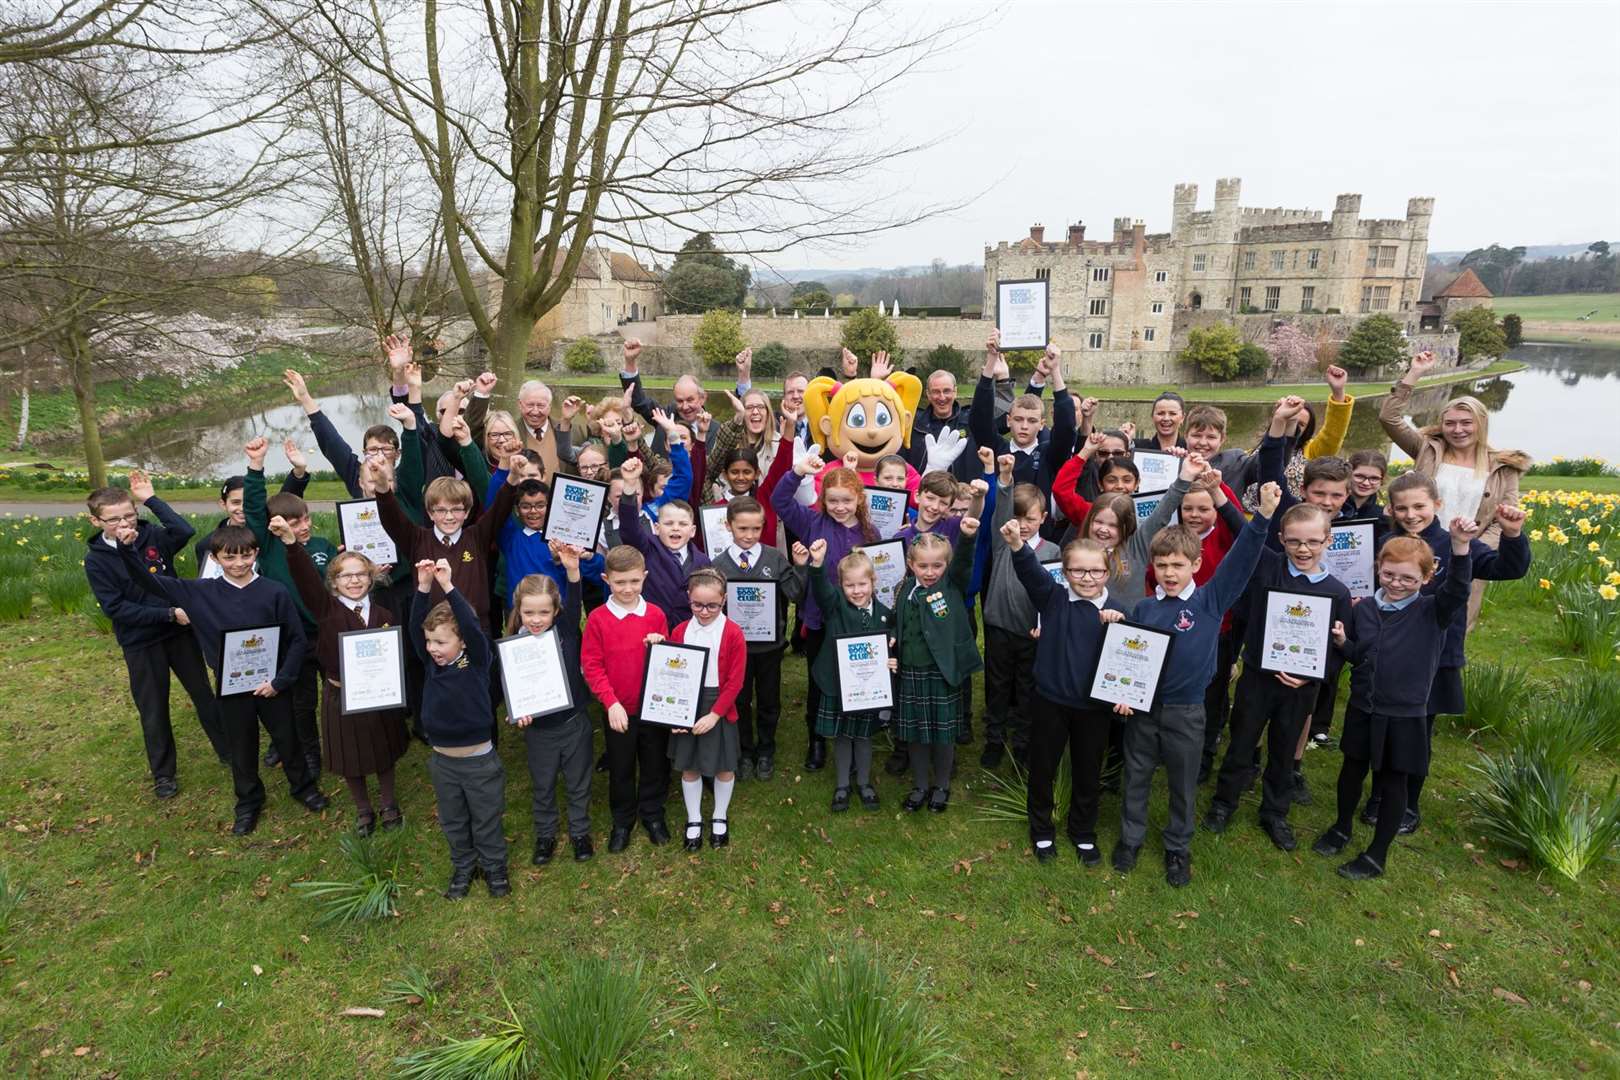 District winners and supporters celebrate walk to school and reading at a prize-giving event at Leeds Castle.